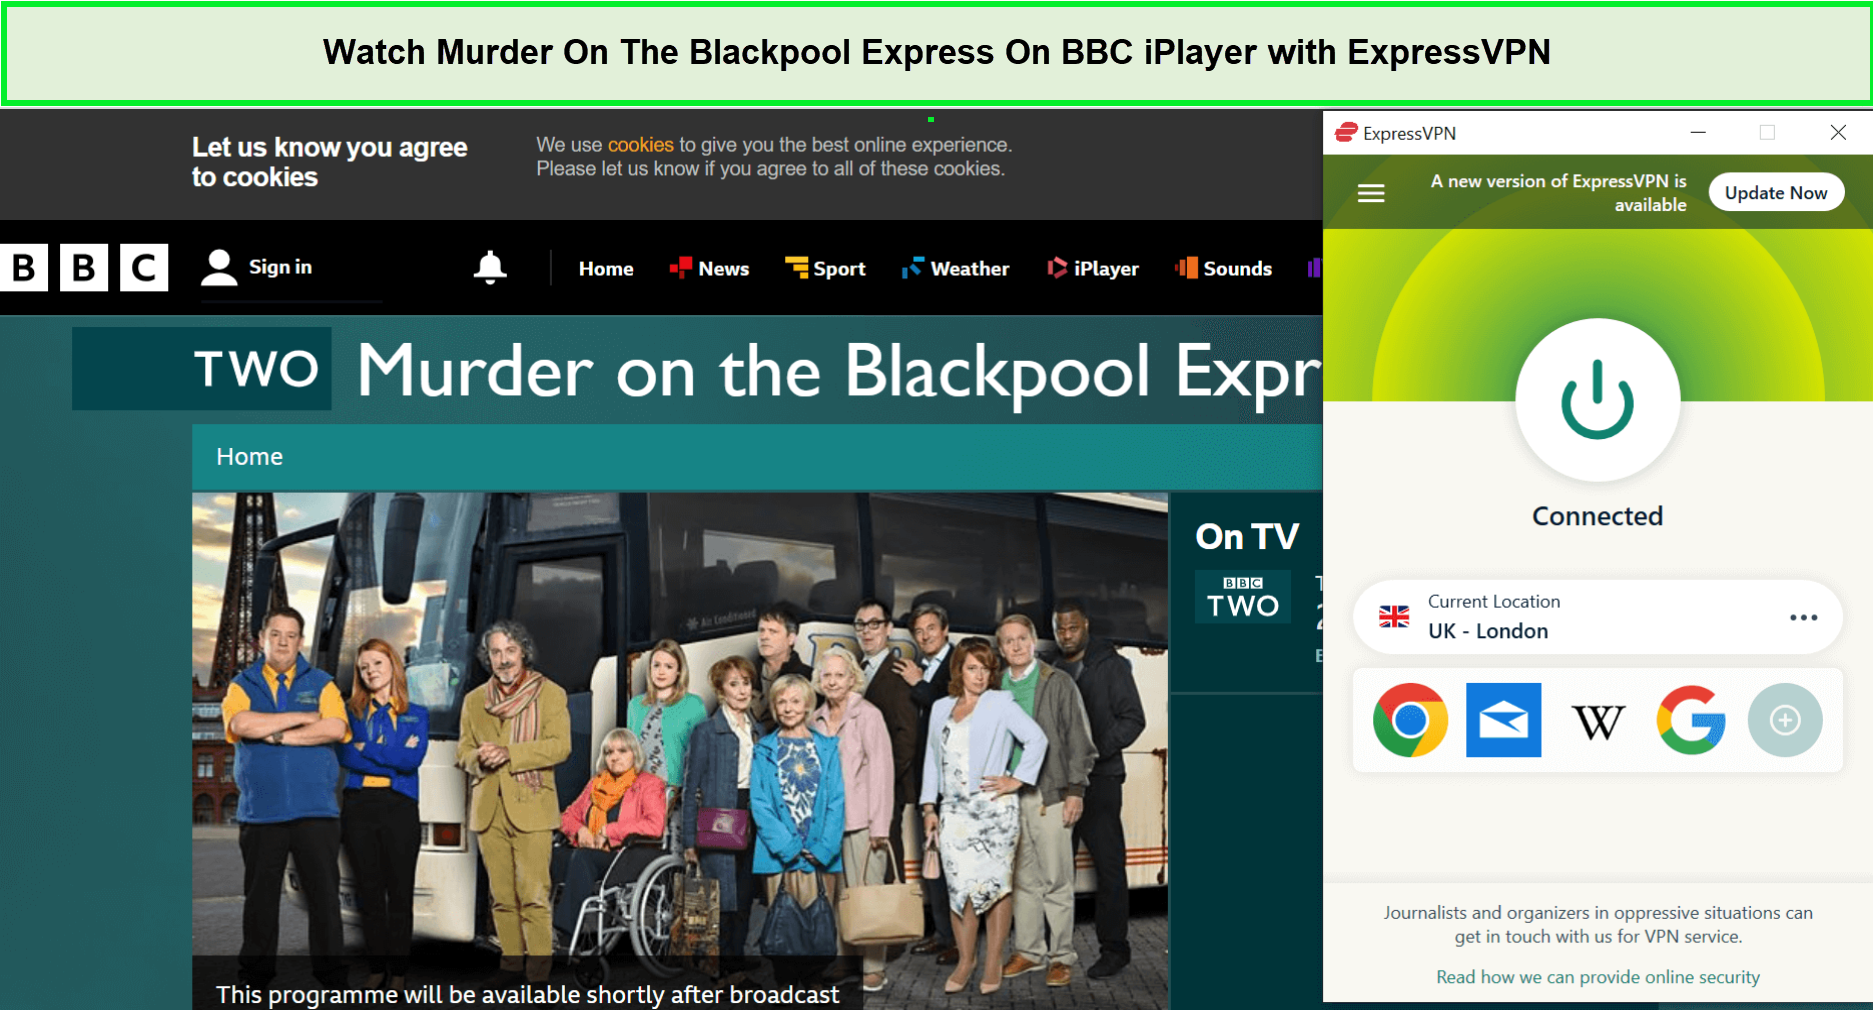 Watch-Murder-On-The-Blackpool-Express-in-Spain-On-BBC-iPlayer-with-ExpressVPN